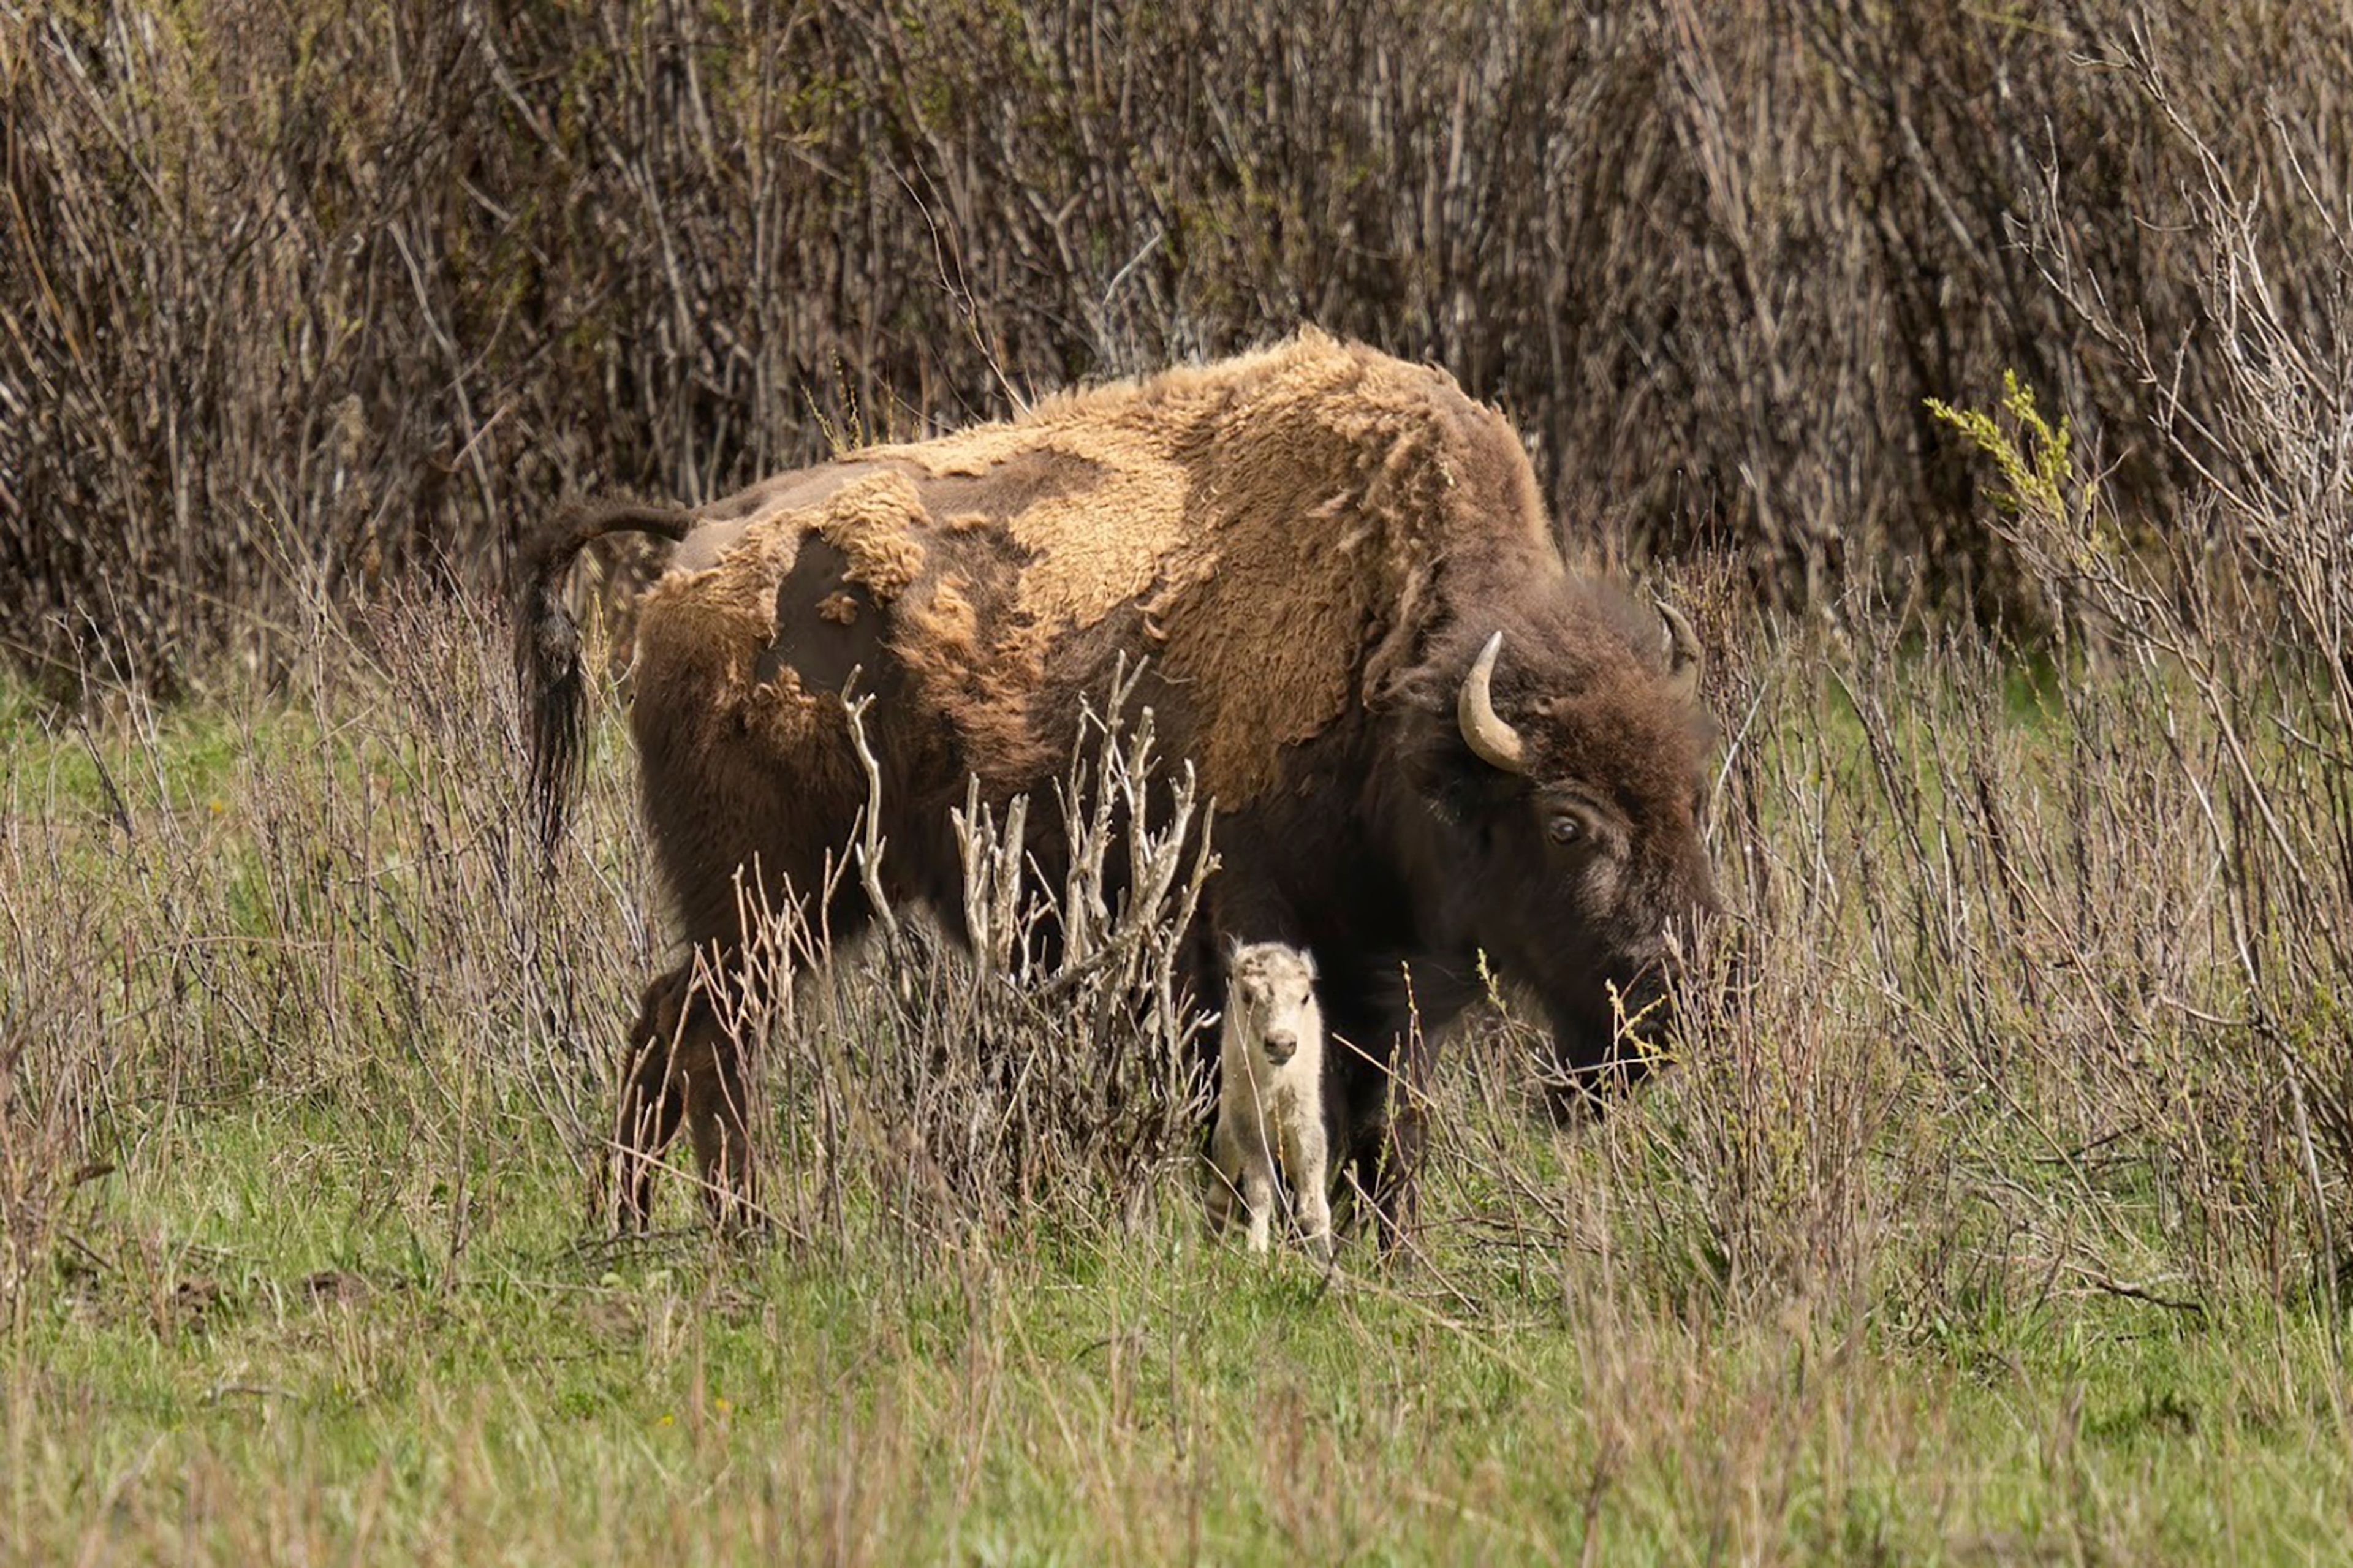 This photo provided by Jordan Creech shows a white buffalo calf born on June 4, 2024, in the Lamar Valley in Yellowstone National Park, a spiritually significant event for many Native American tribes. The calf's birth fulfills a prophecy for the Lakota people that portends better times but also signals that more must be done to protect the earth and its animals. (Jordan Creech via AP)